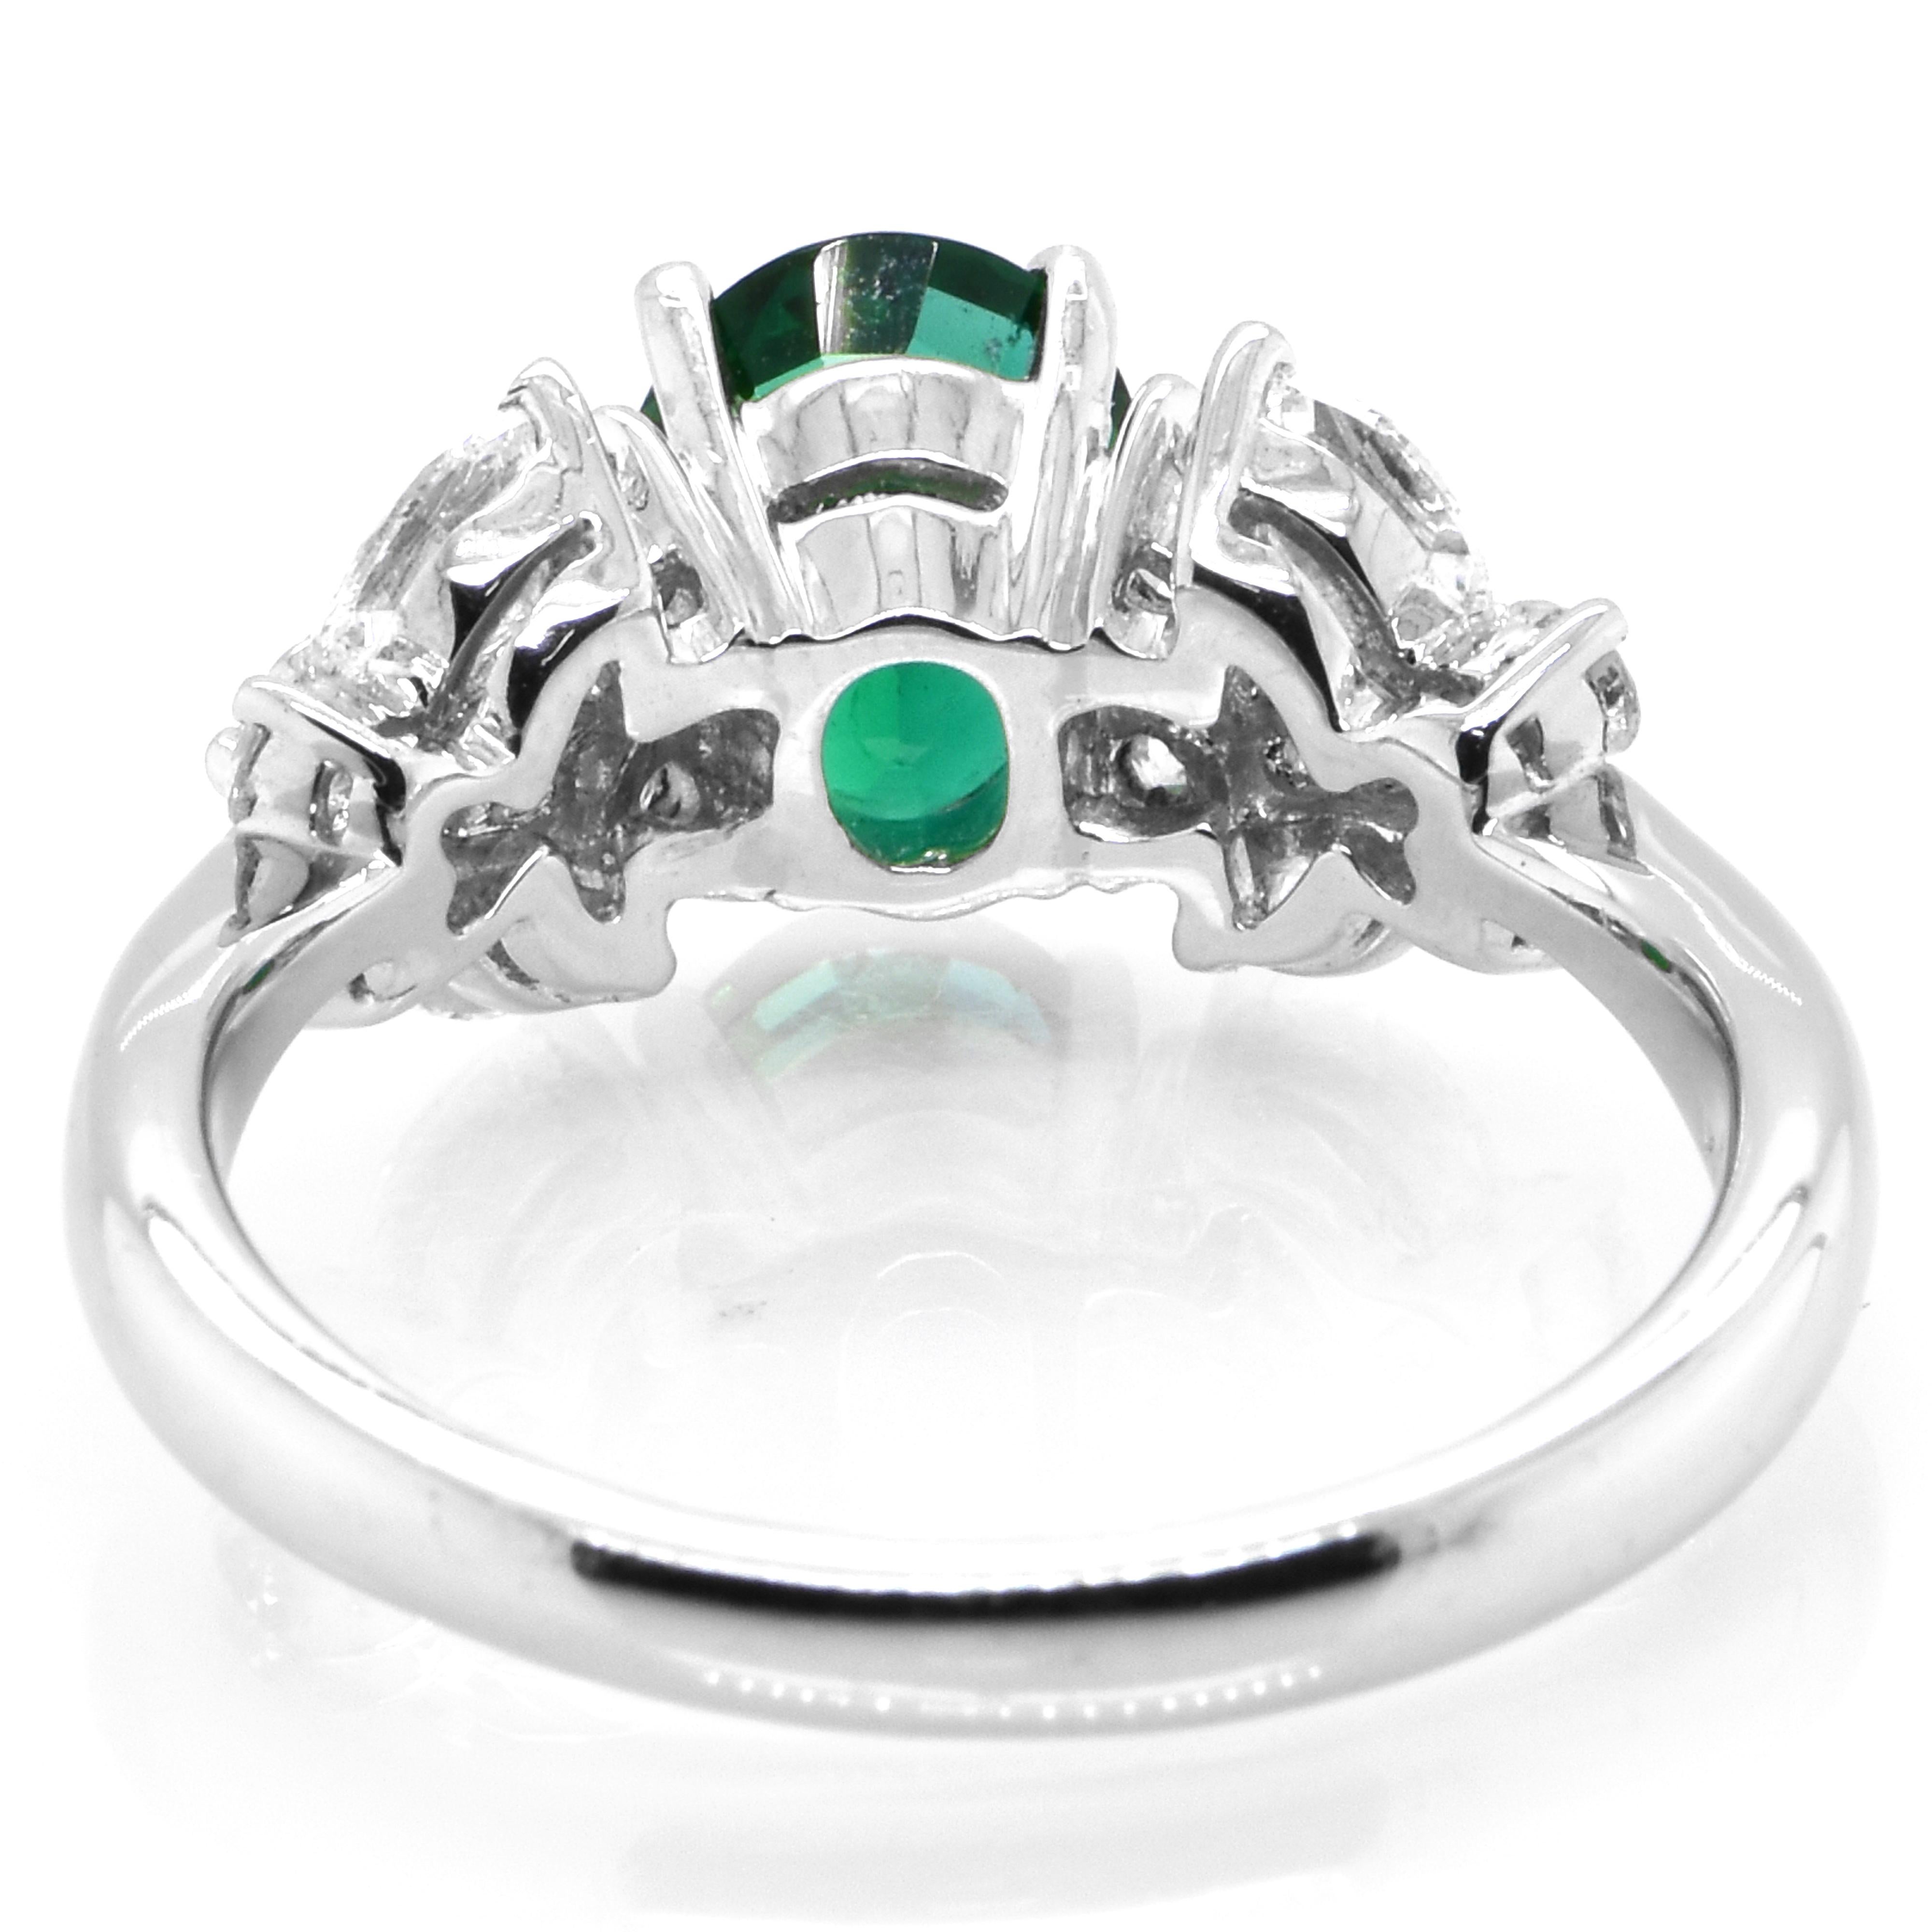 Women's 1.28 Carat Natural Vivid Green Emerald and Diamond Ring Made in Platinum For Sale